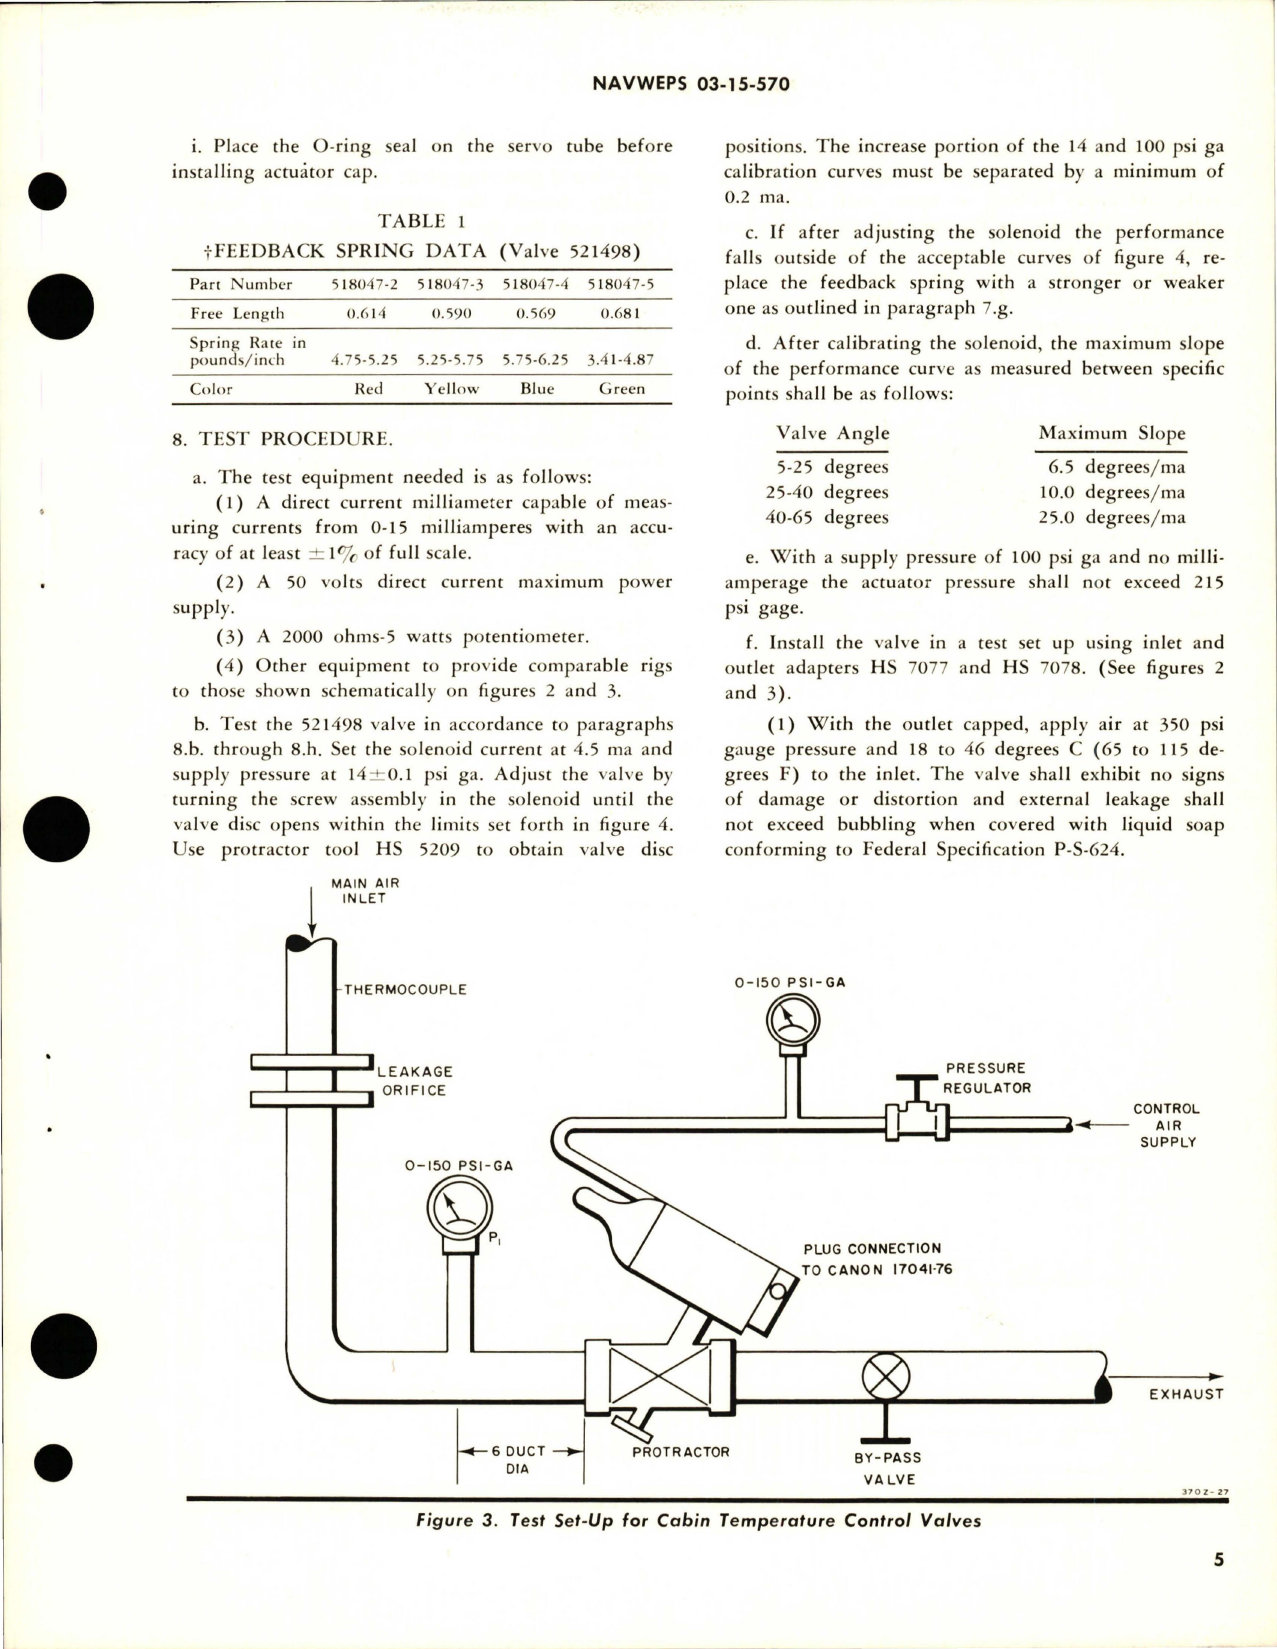 Sample page 5 from AirCorps Library document: Overhaul Instructions with Parts for Cabin Temperature Control Valves - Assembly No. 96121 and 521498